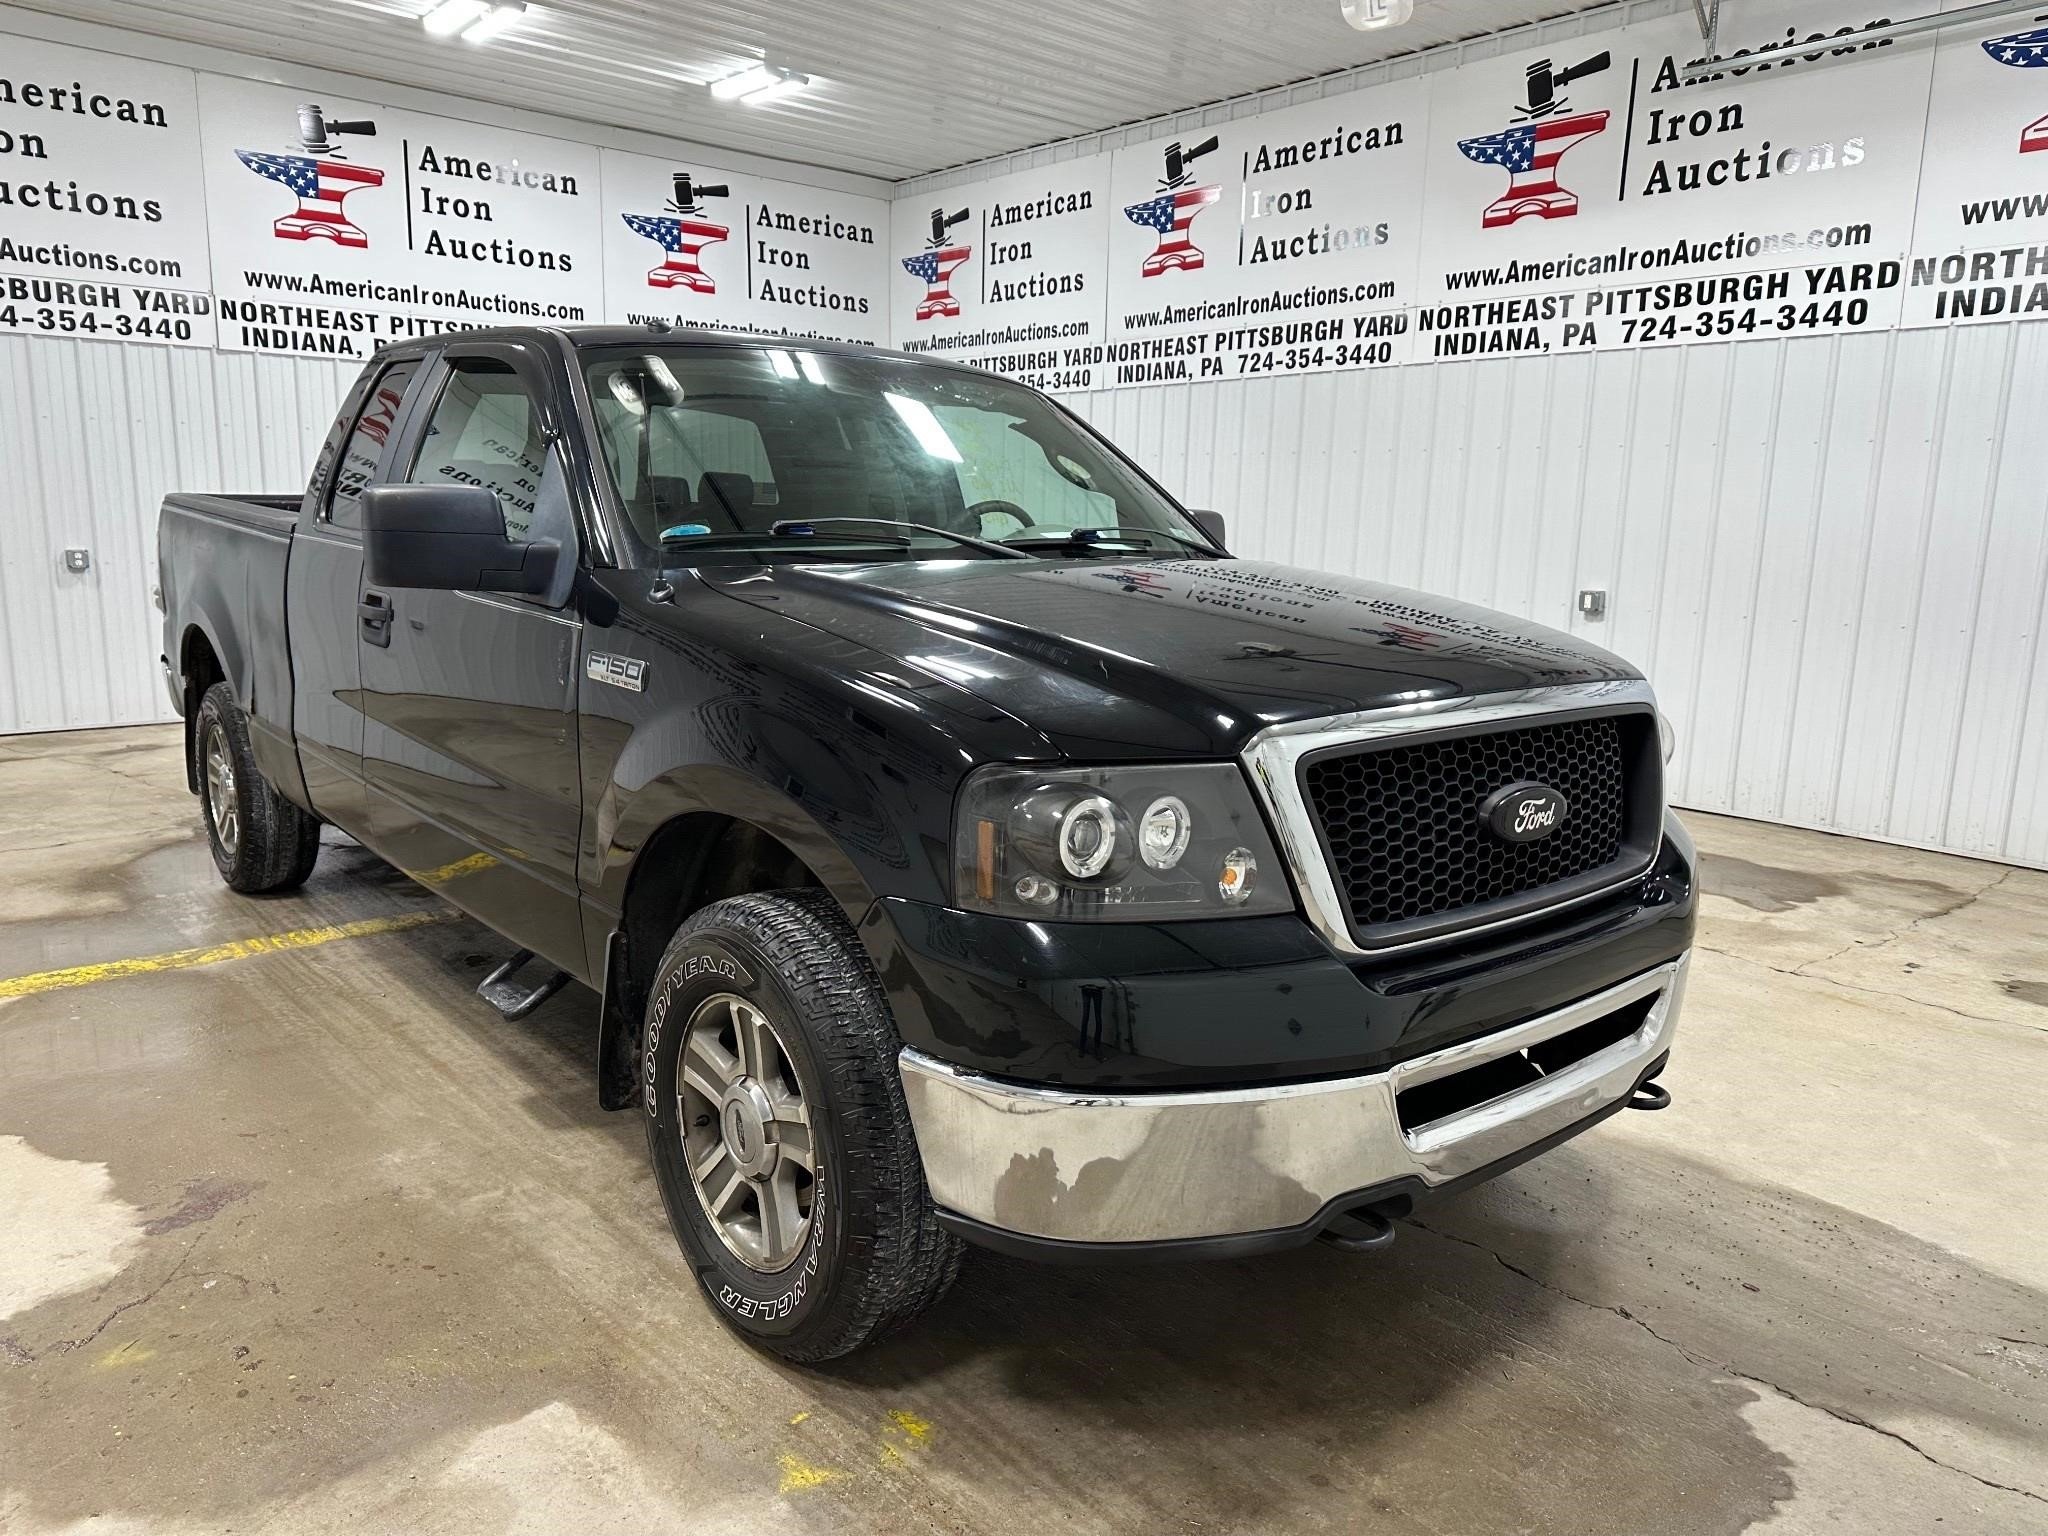 2007 Ford F-150 XLT Truck-Titled-NO RESERVE